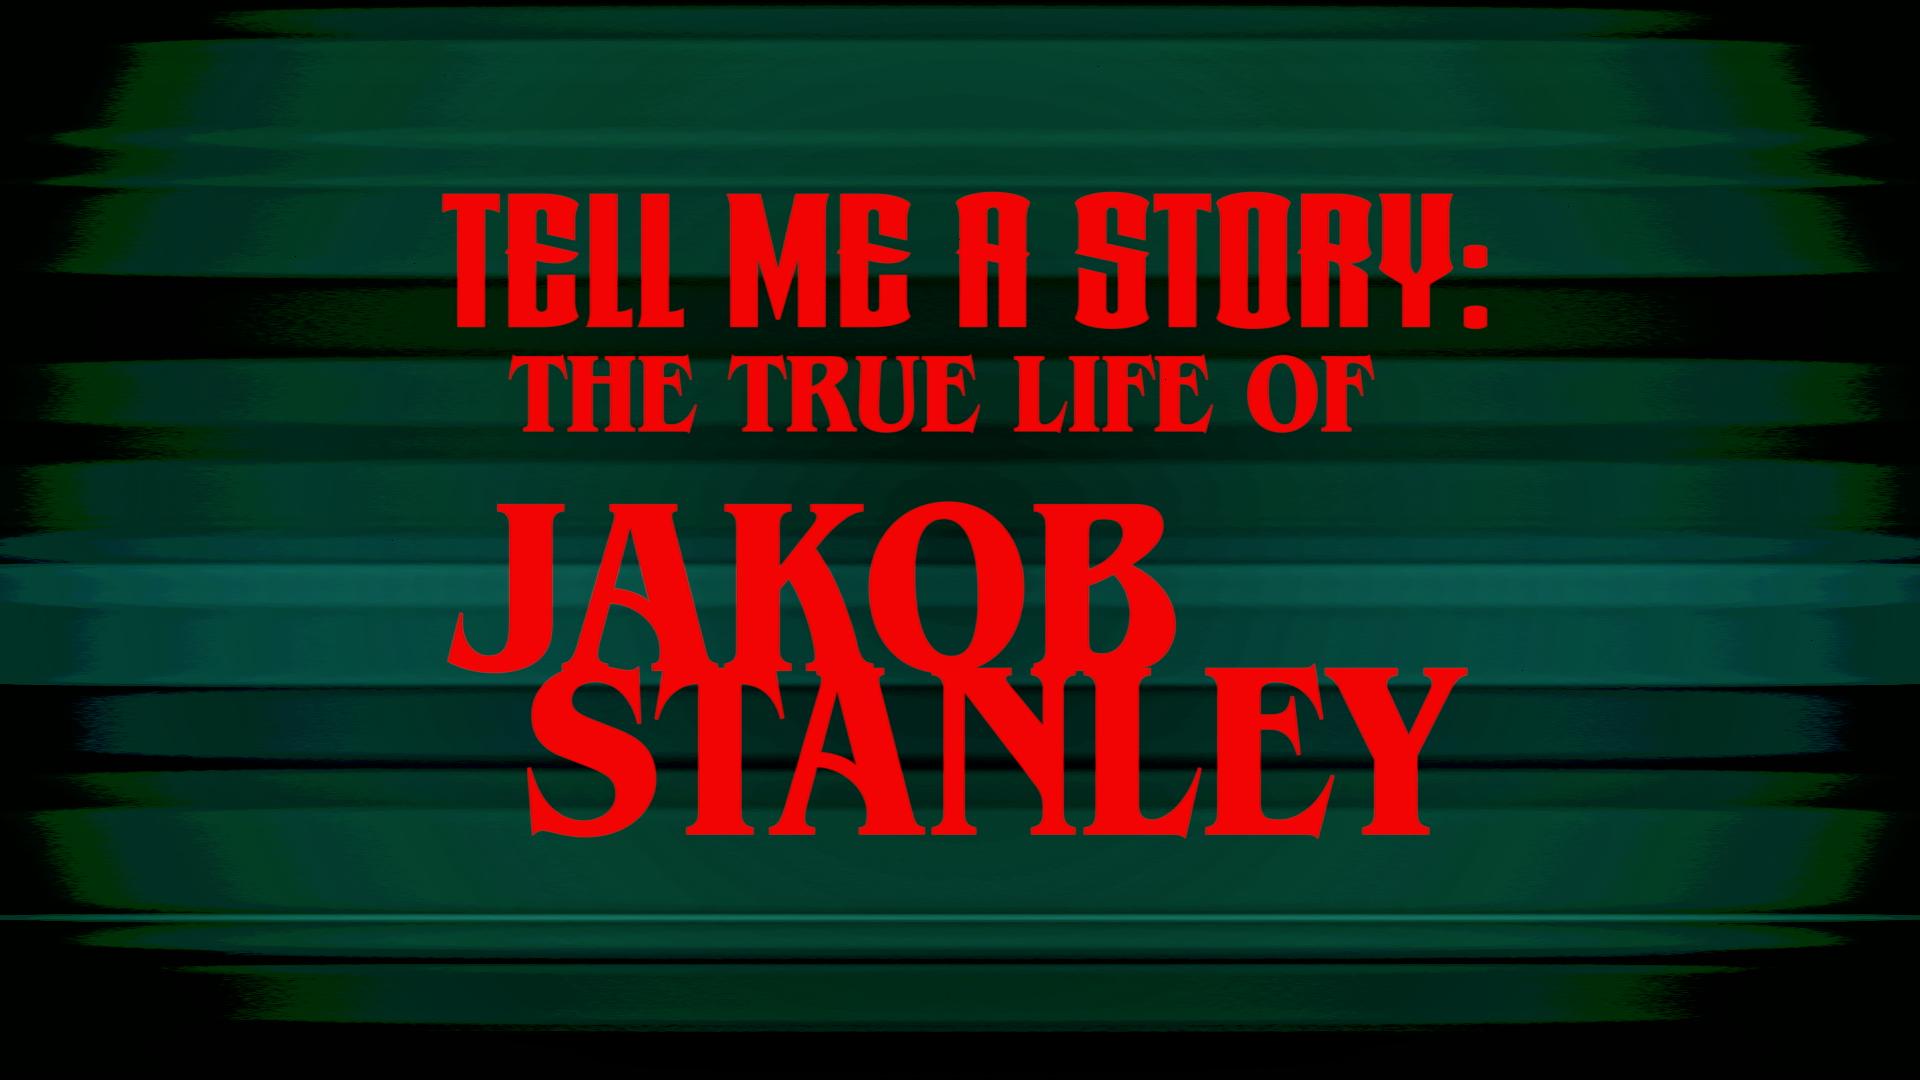 TELL ME A STORY: THE TRUE LIFE OF JAKOB STANLEY